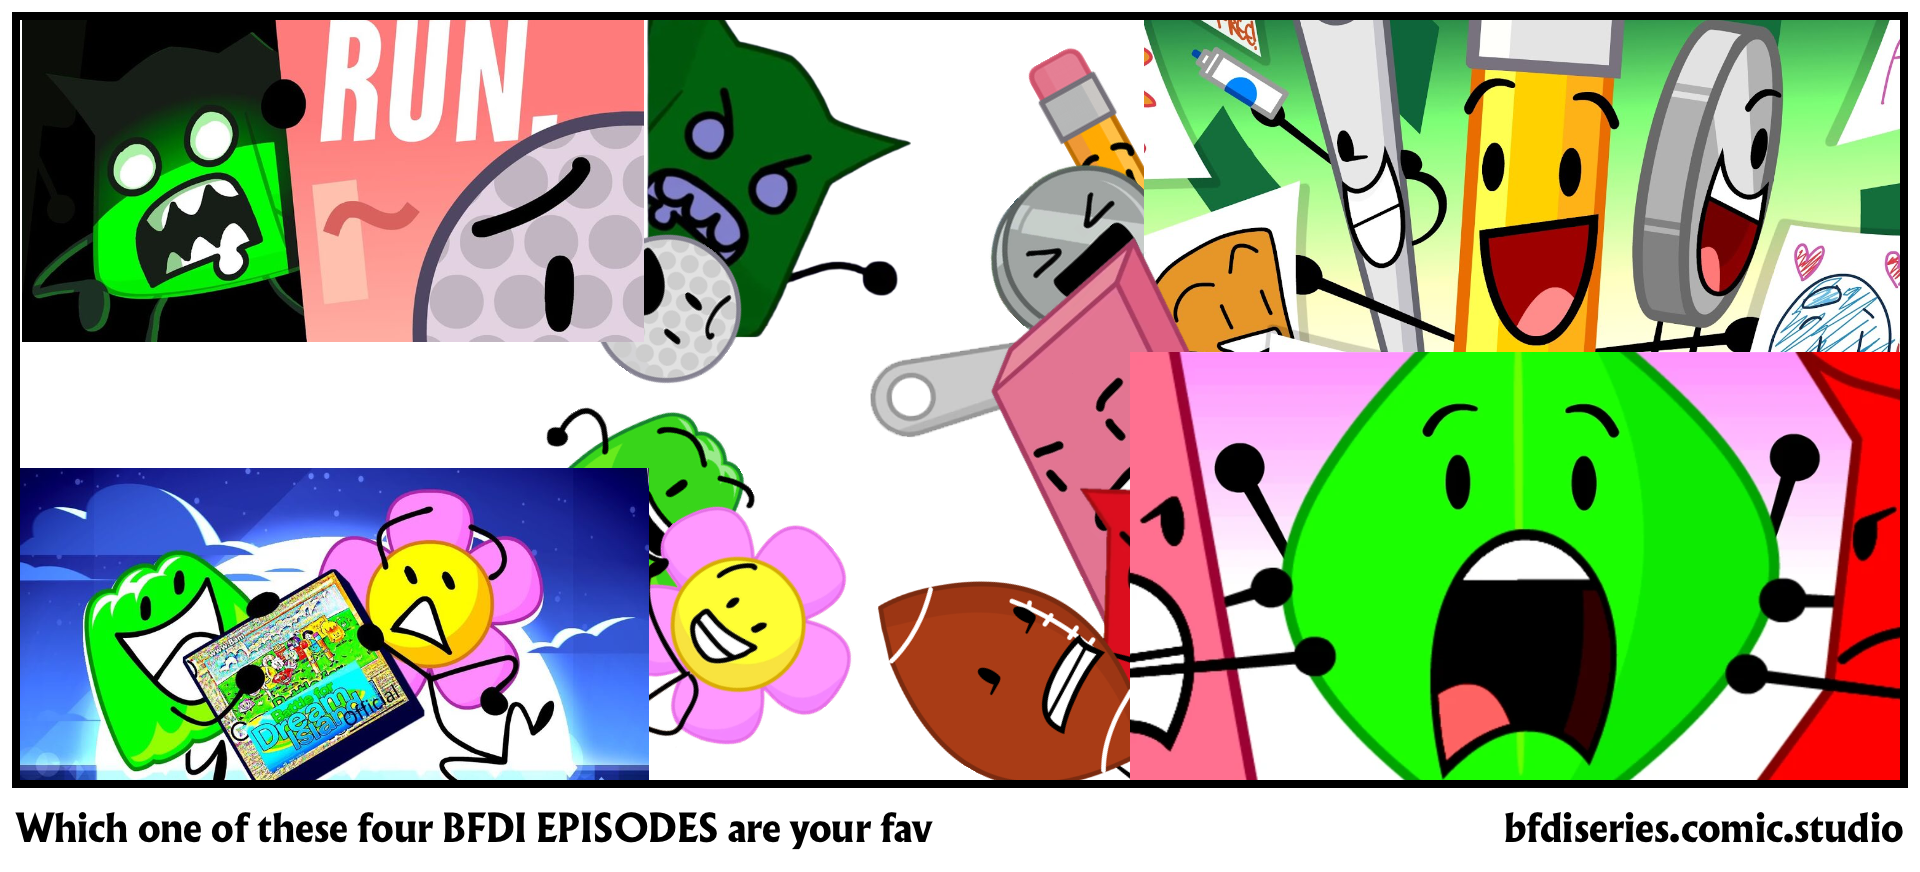 Which one of these four BFDI EPISODES are your fav